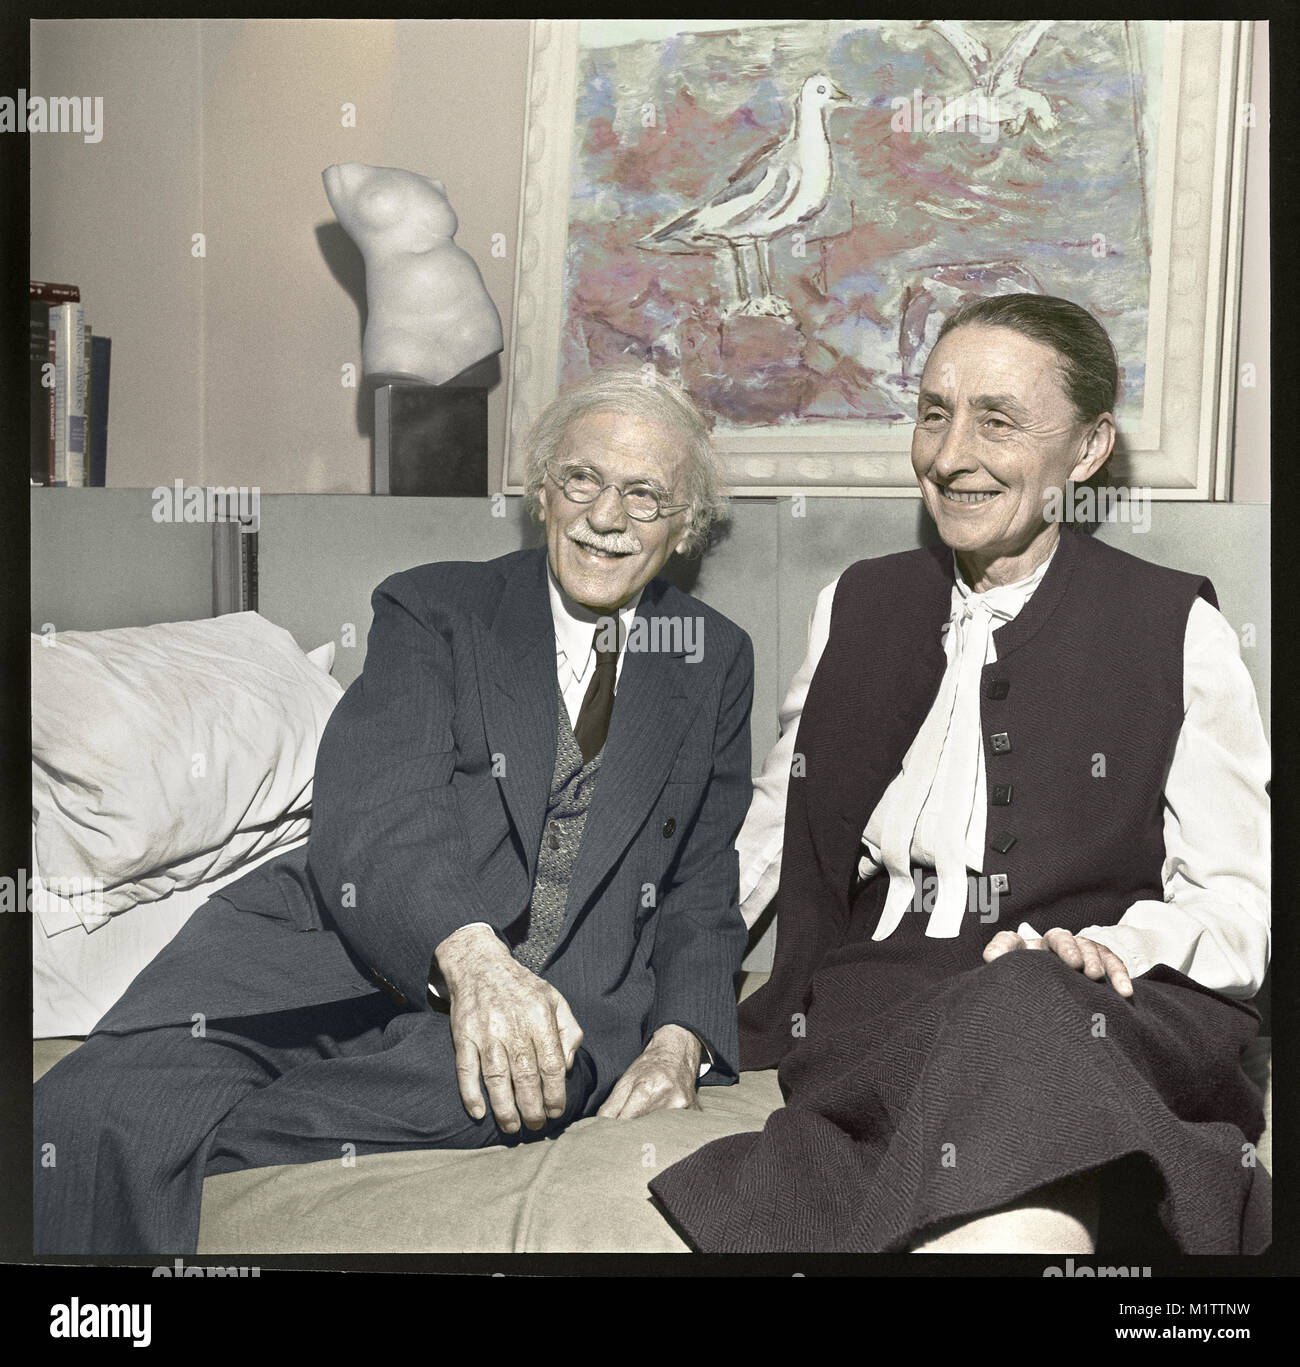 Photographer Alfred Stieglitz and artist Georgia O’Keeffe in New York City. The married couple are at "An American Place" for an exhibition of John Marin in 1942. Artwork on wall is “Sea and Gulls” by Marin. Stock Photo